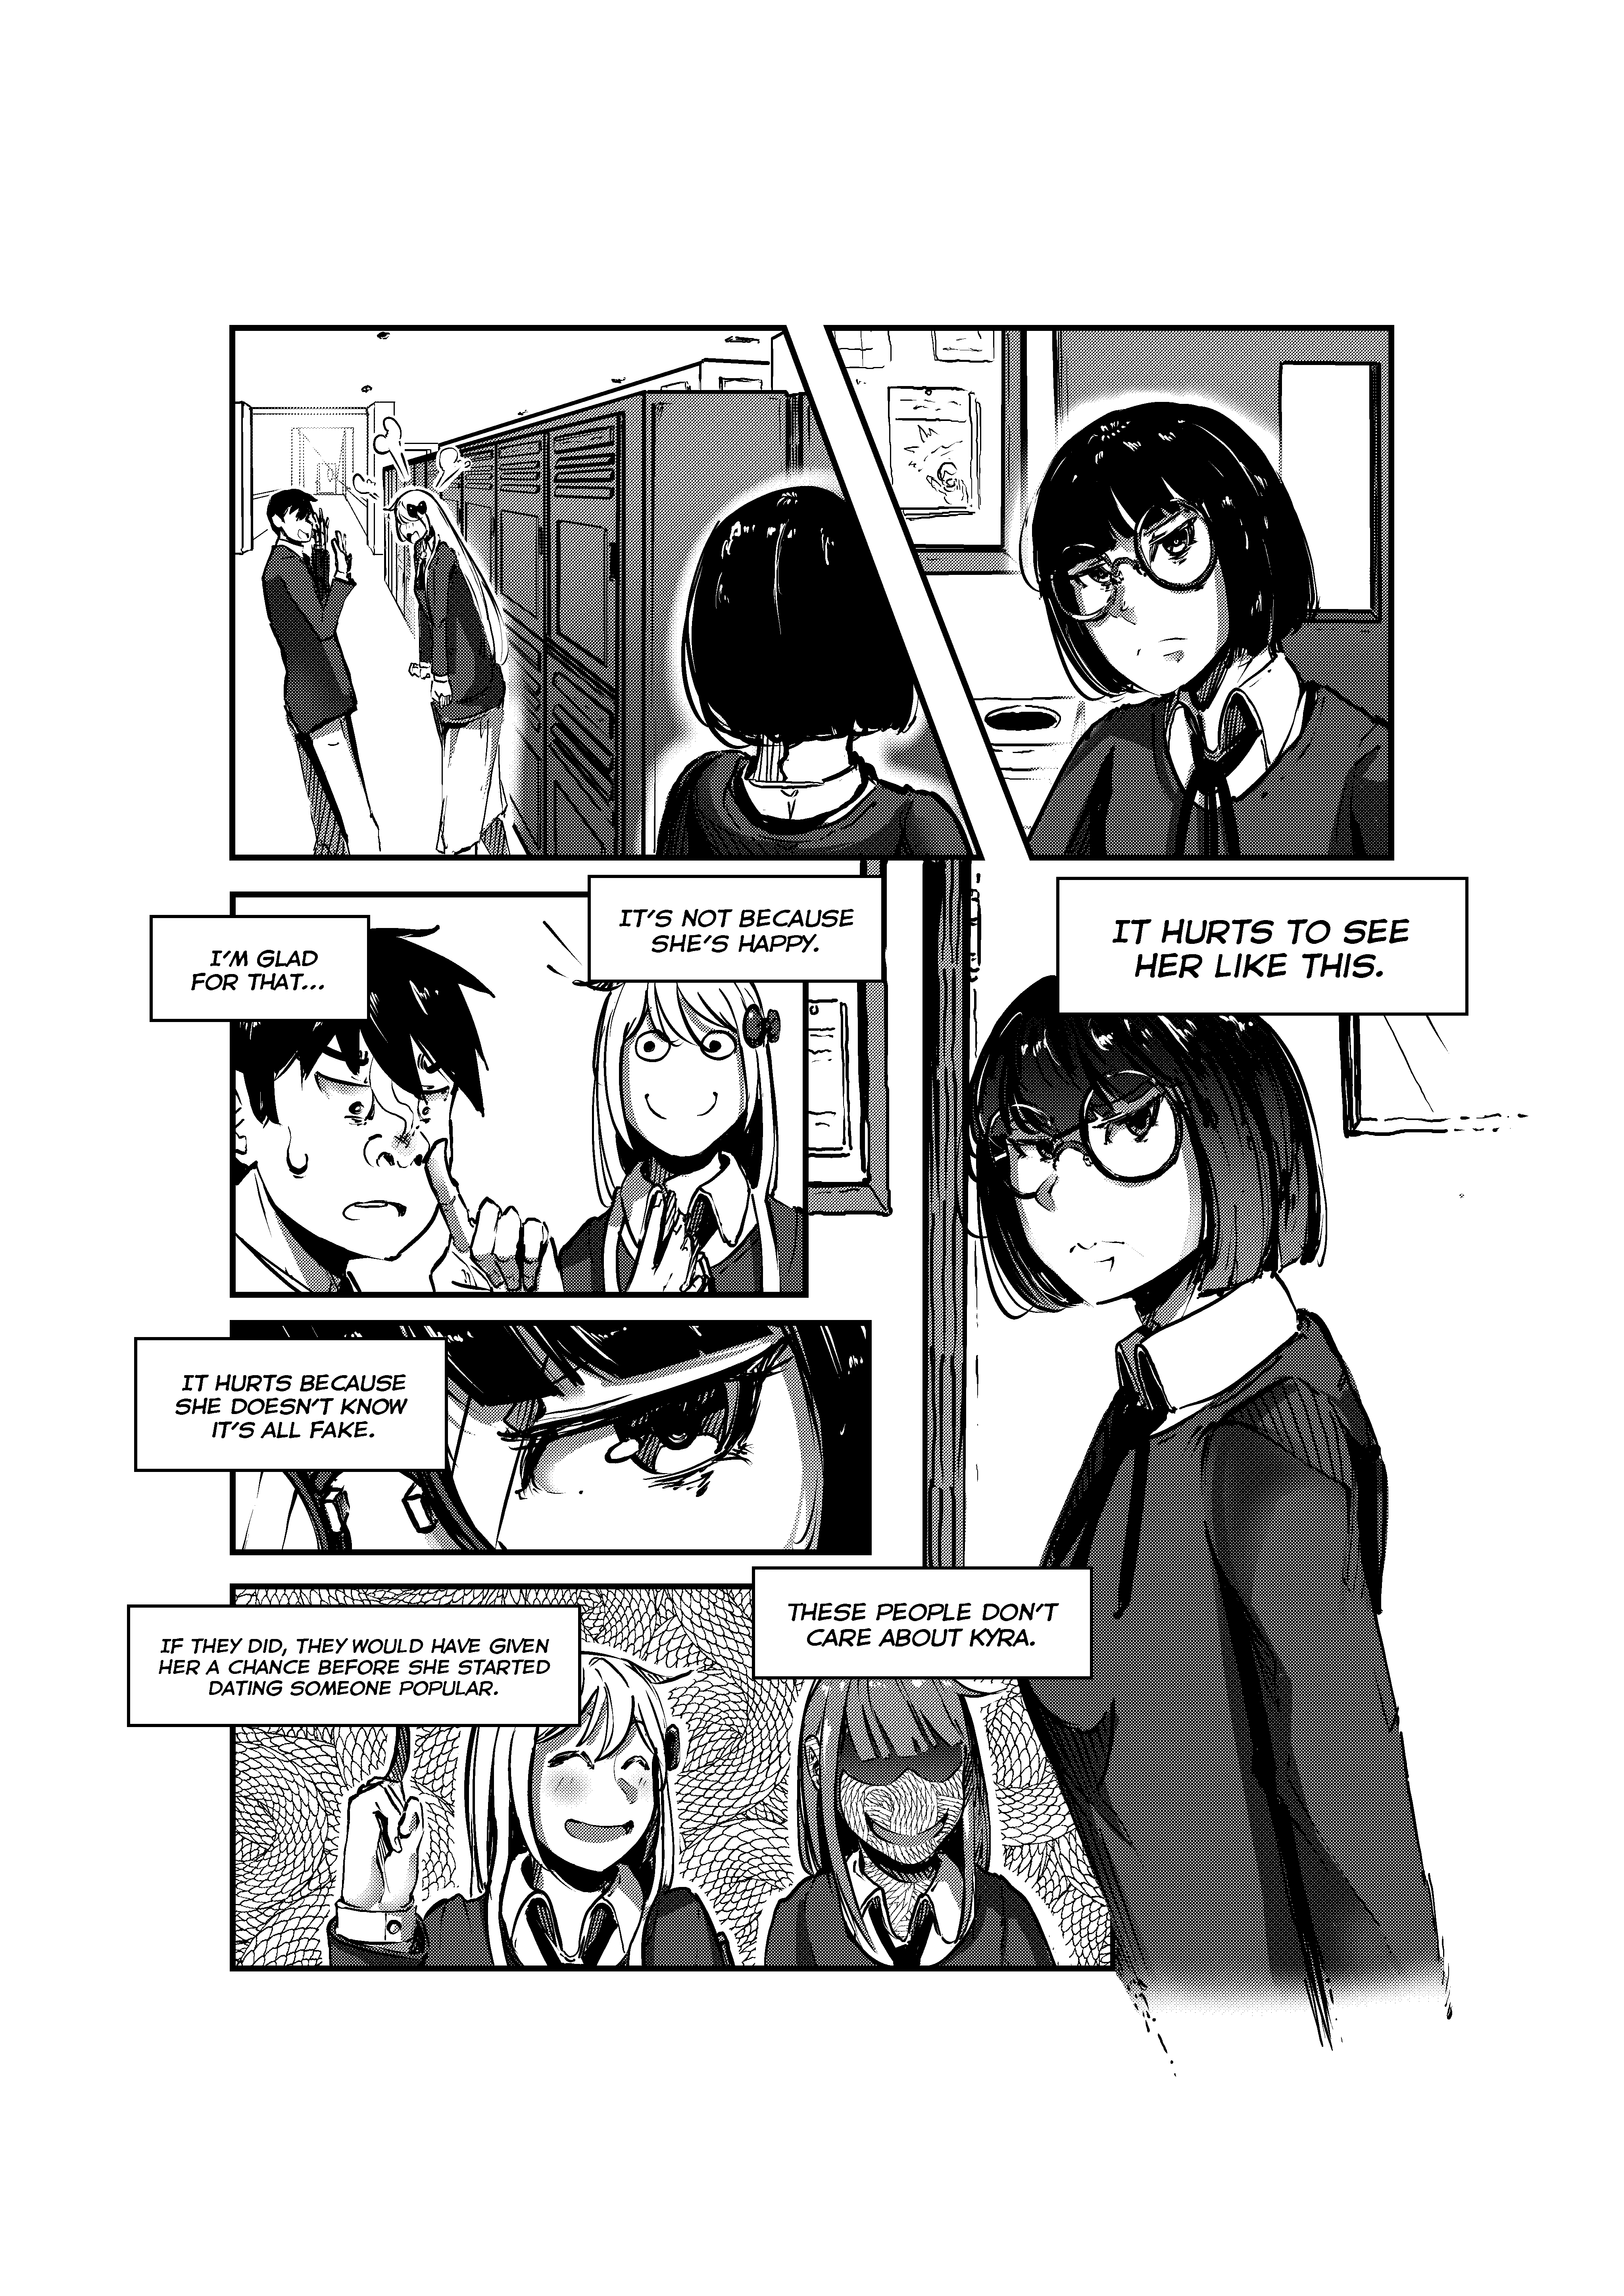 Opposites In Disguise - 15 page 11